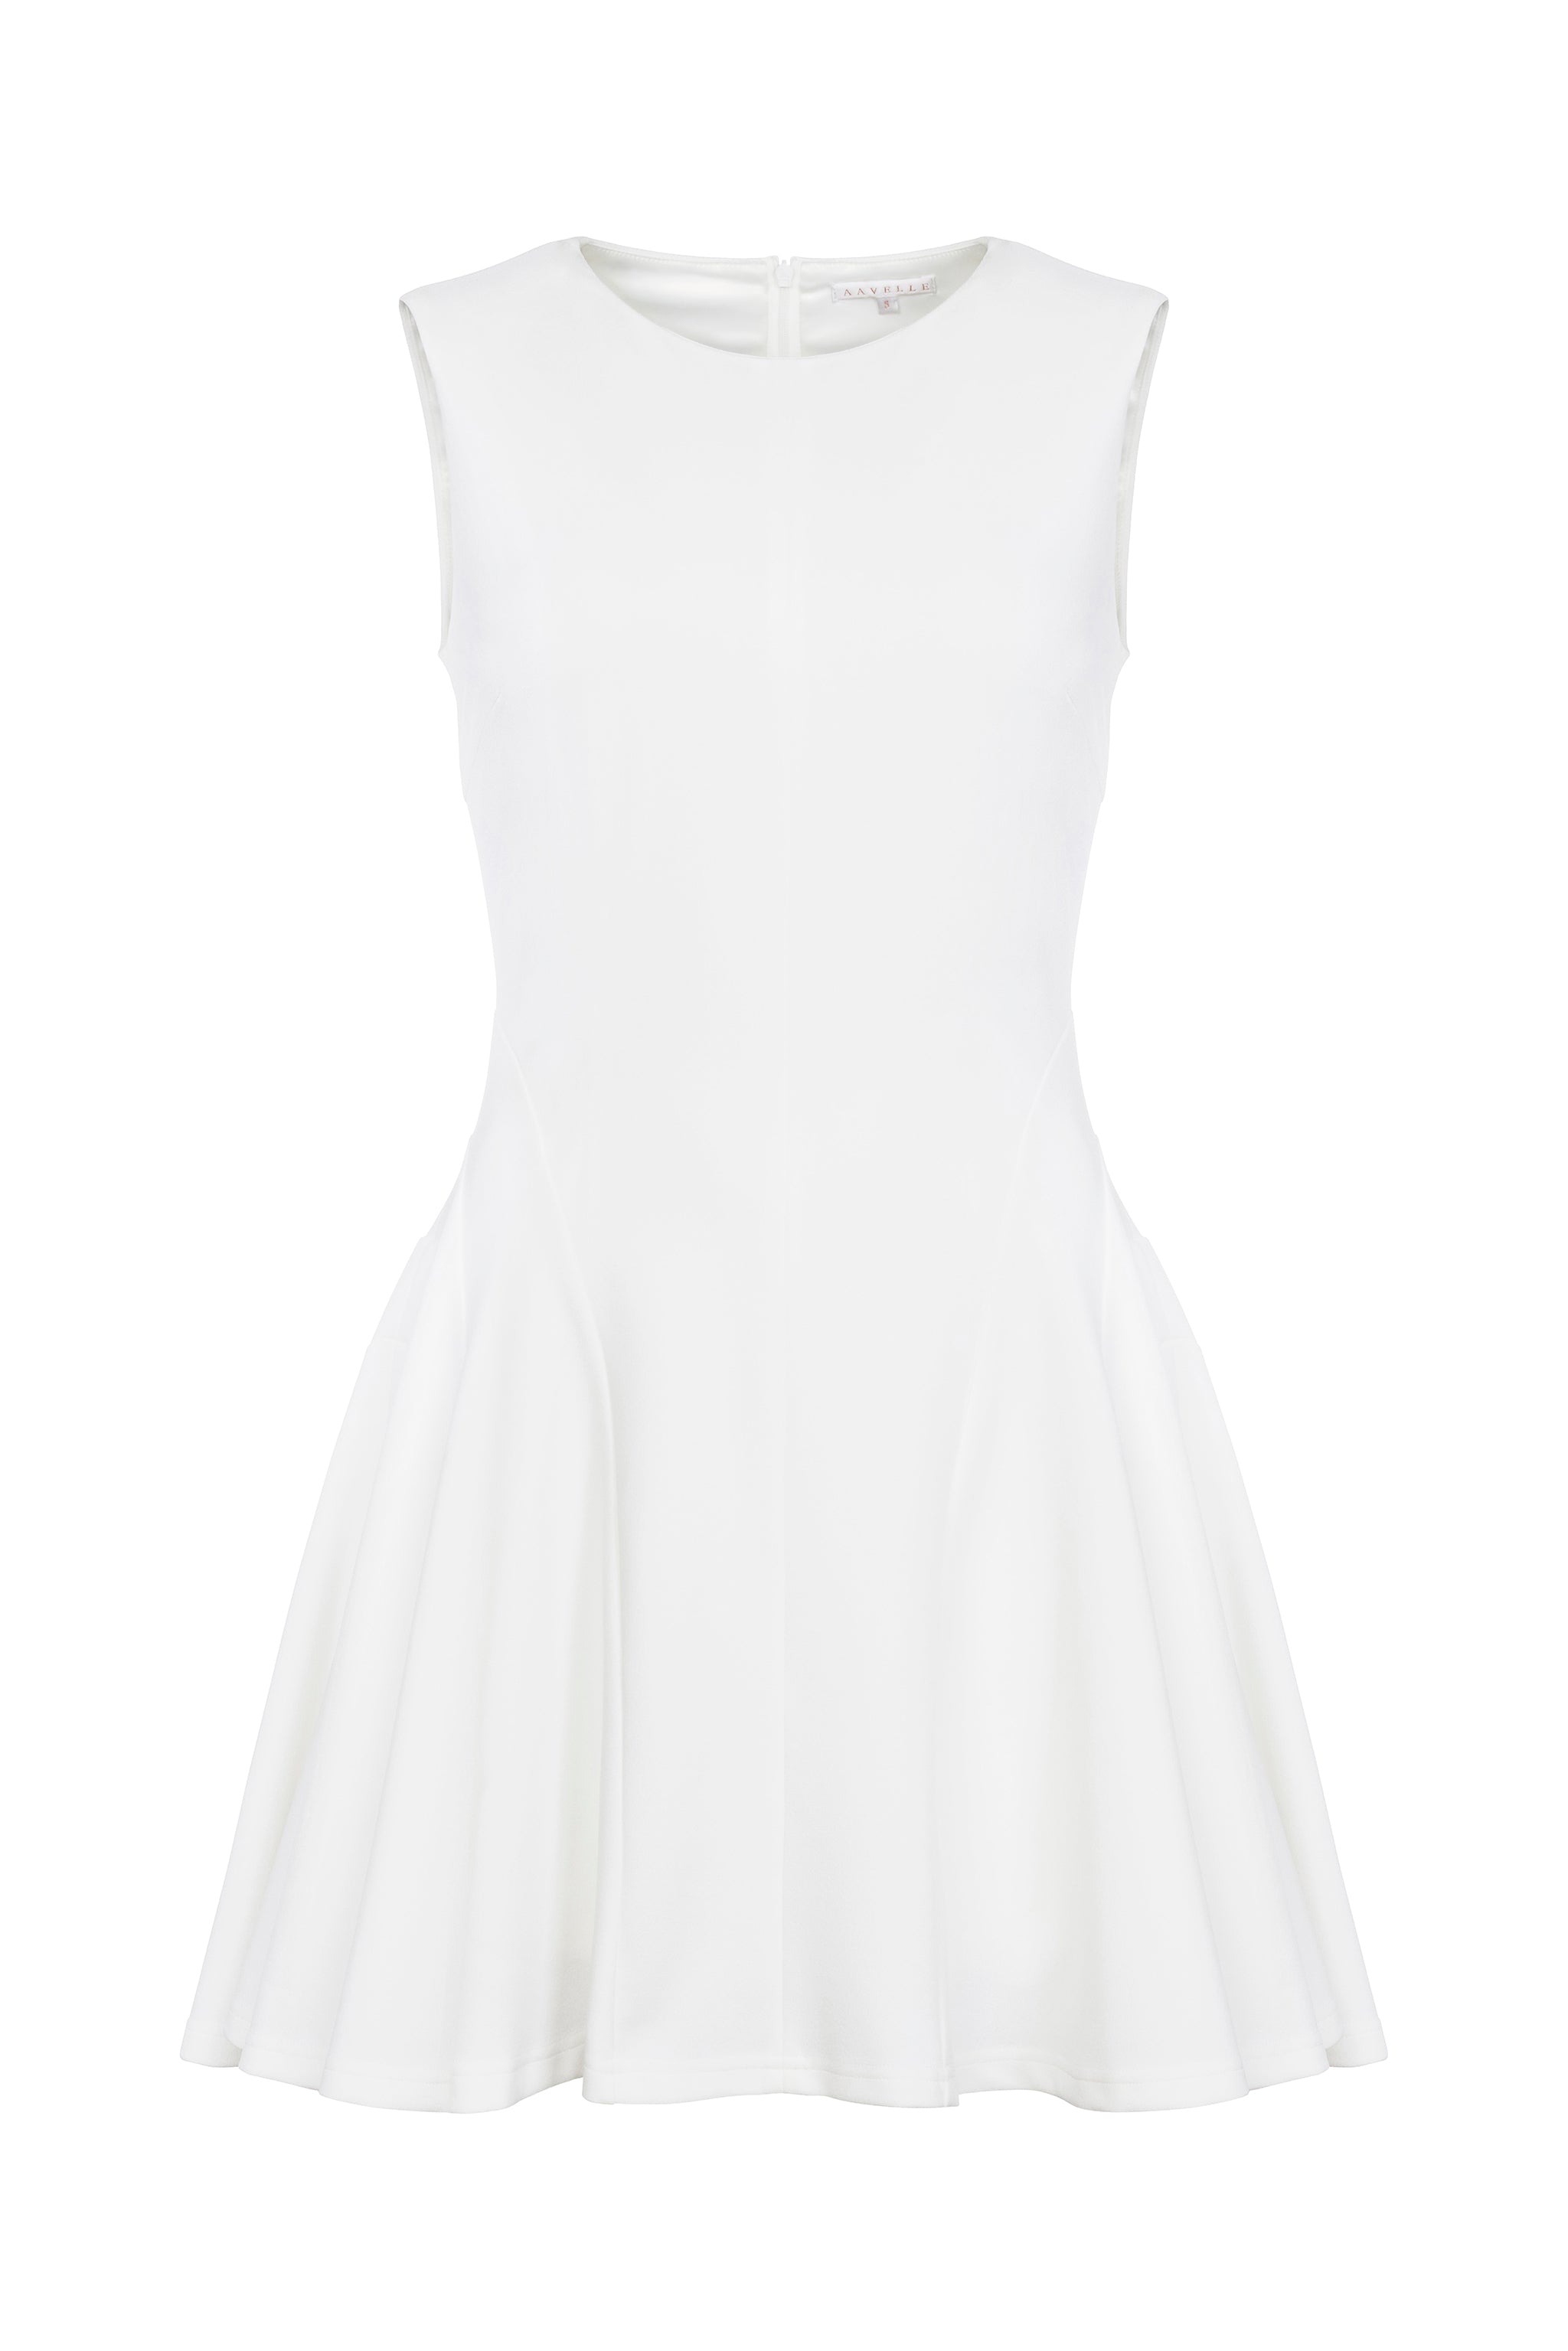 Fit & Flare Dress (White)